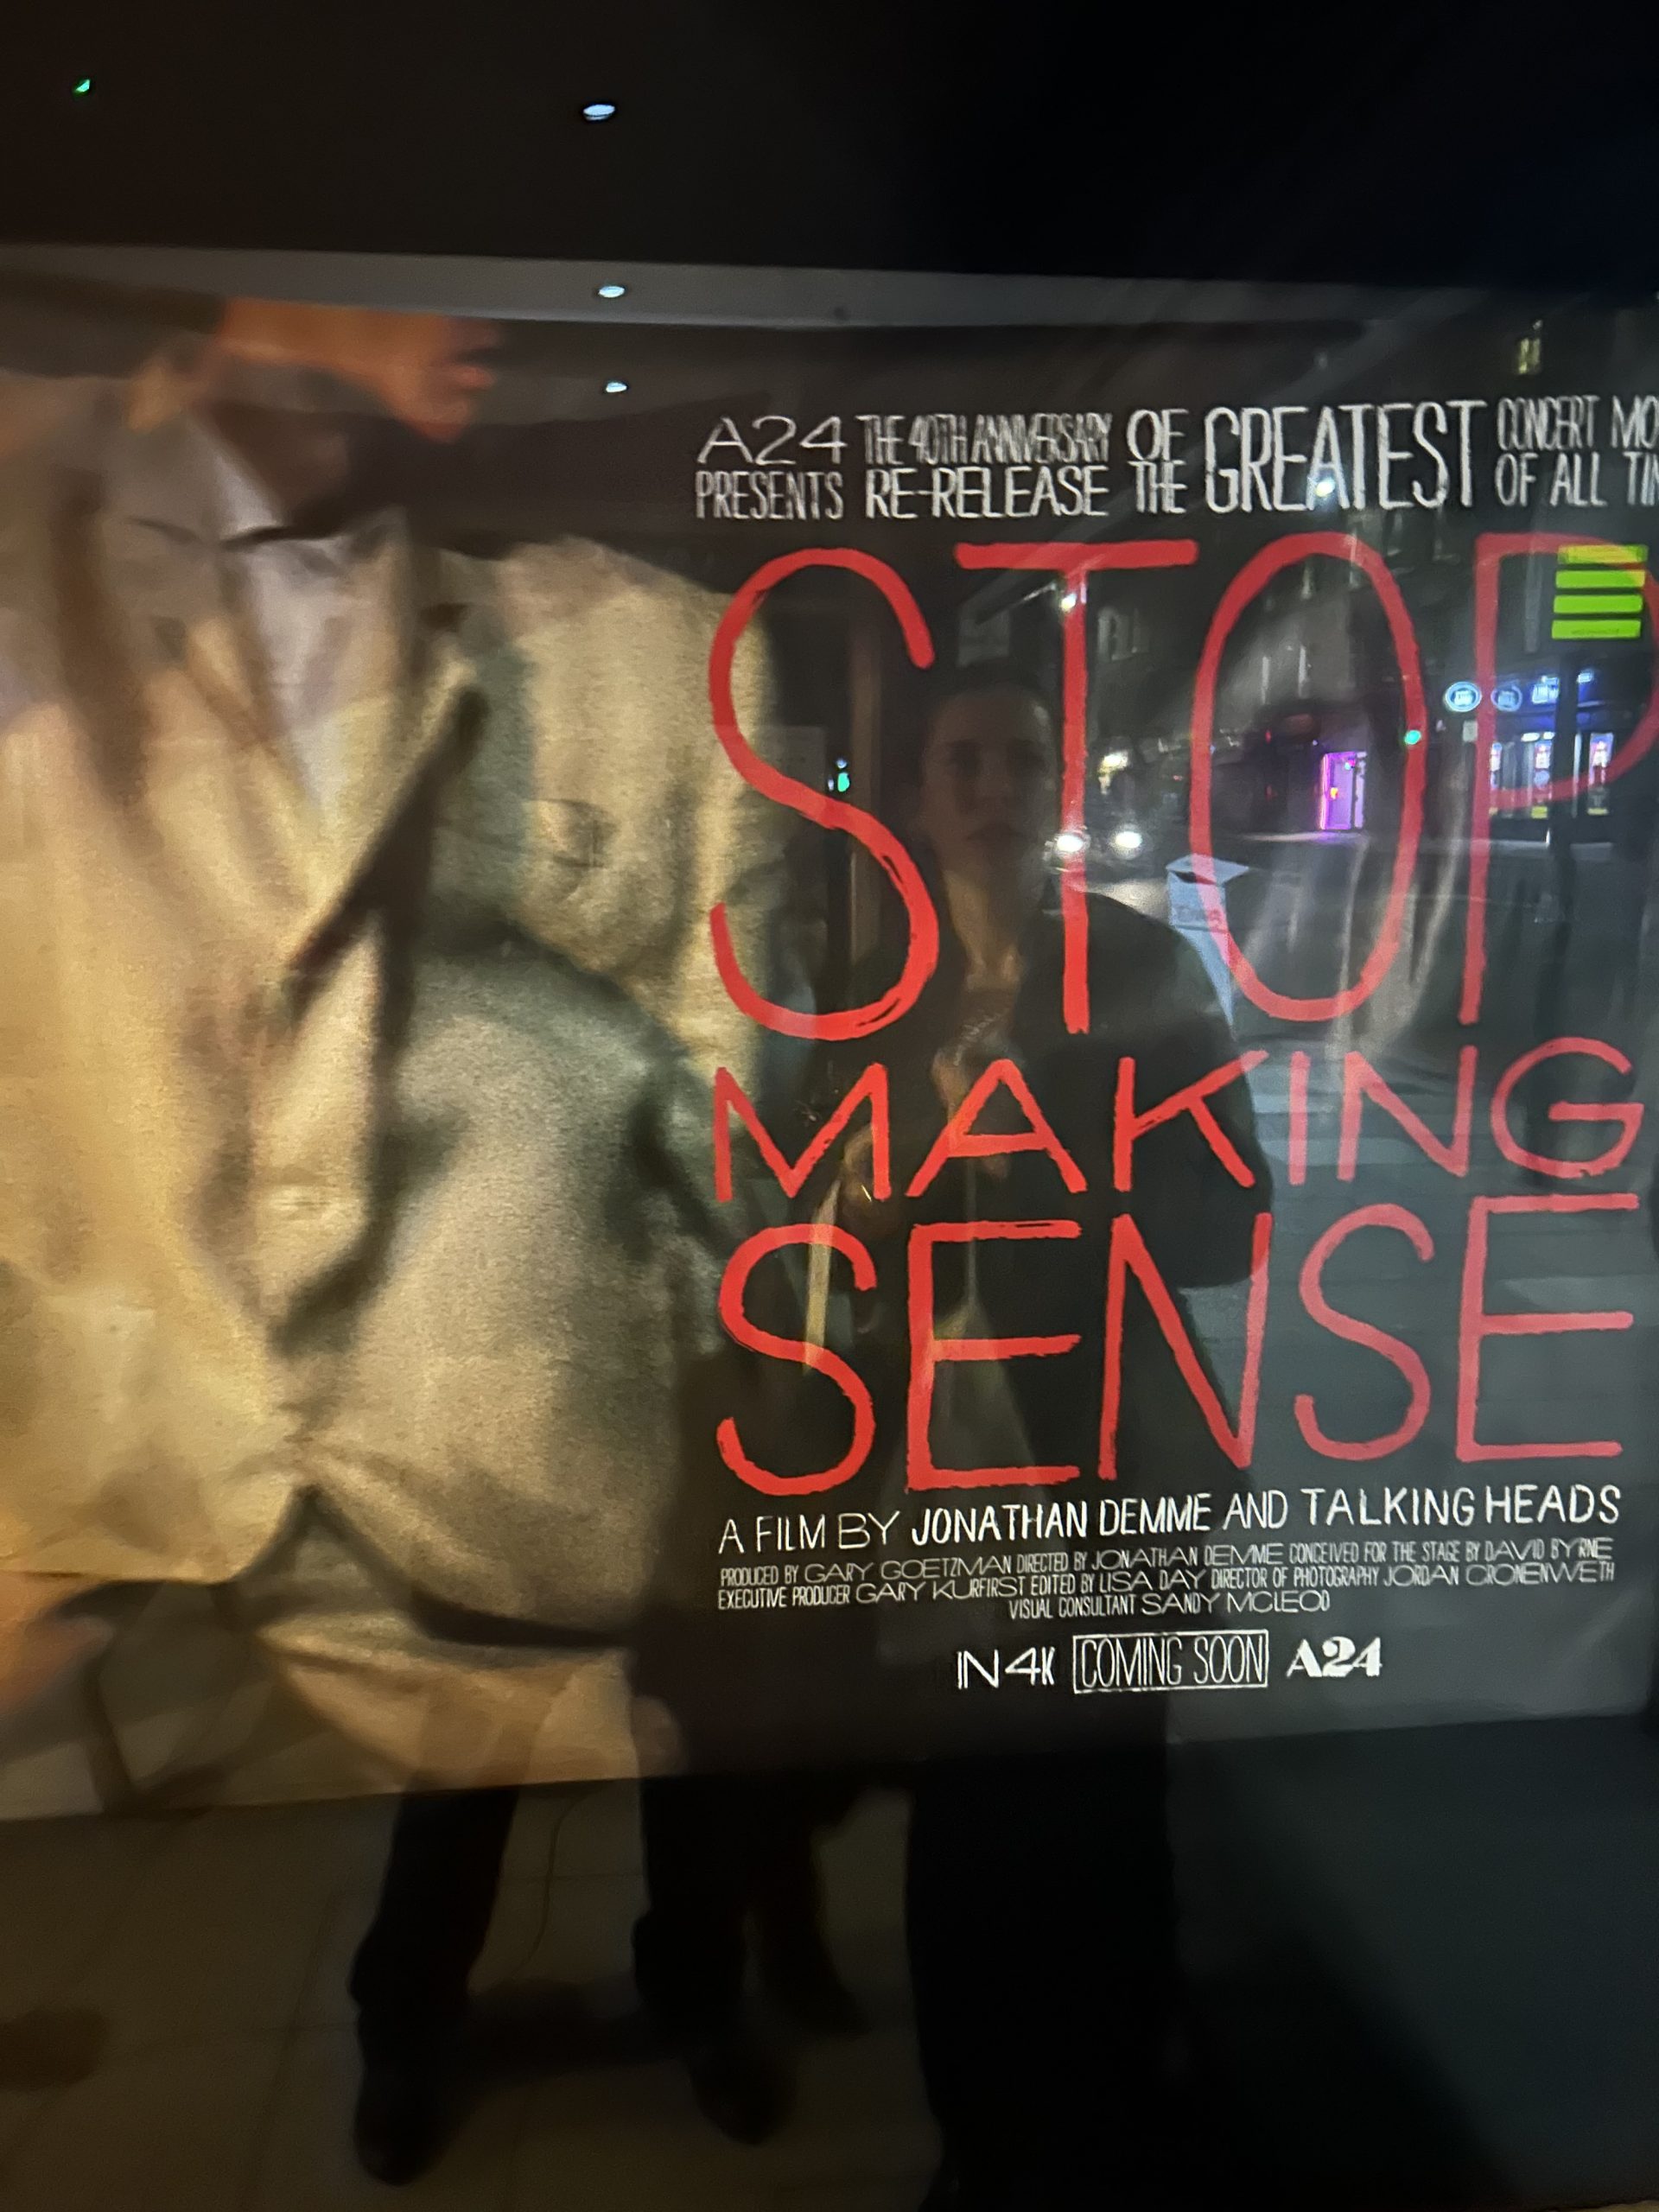 This is the image of the movie poster for 'Stop Making Sense'. We can see the white suit of David Byrnes, with red lettering. This is a picture of the poster, so we can see the reflection of the street on it.